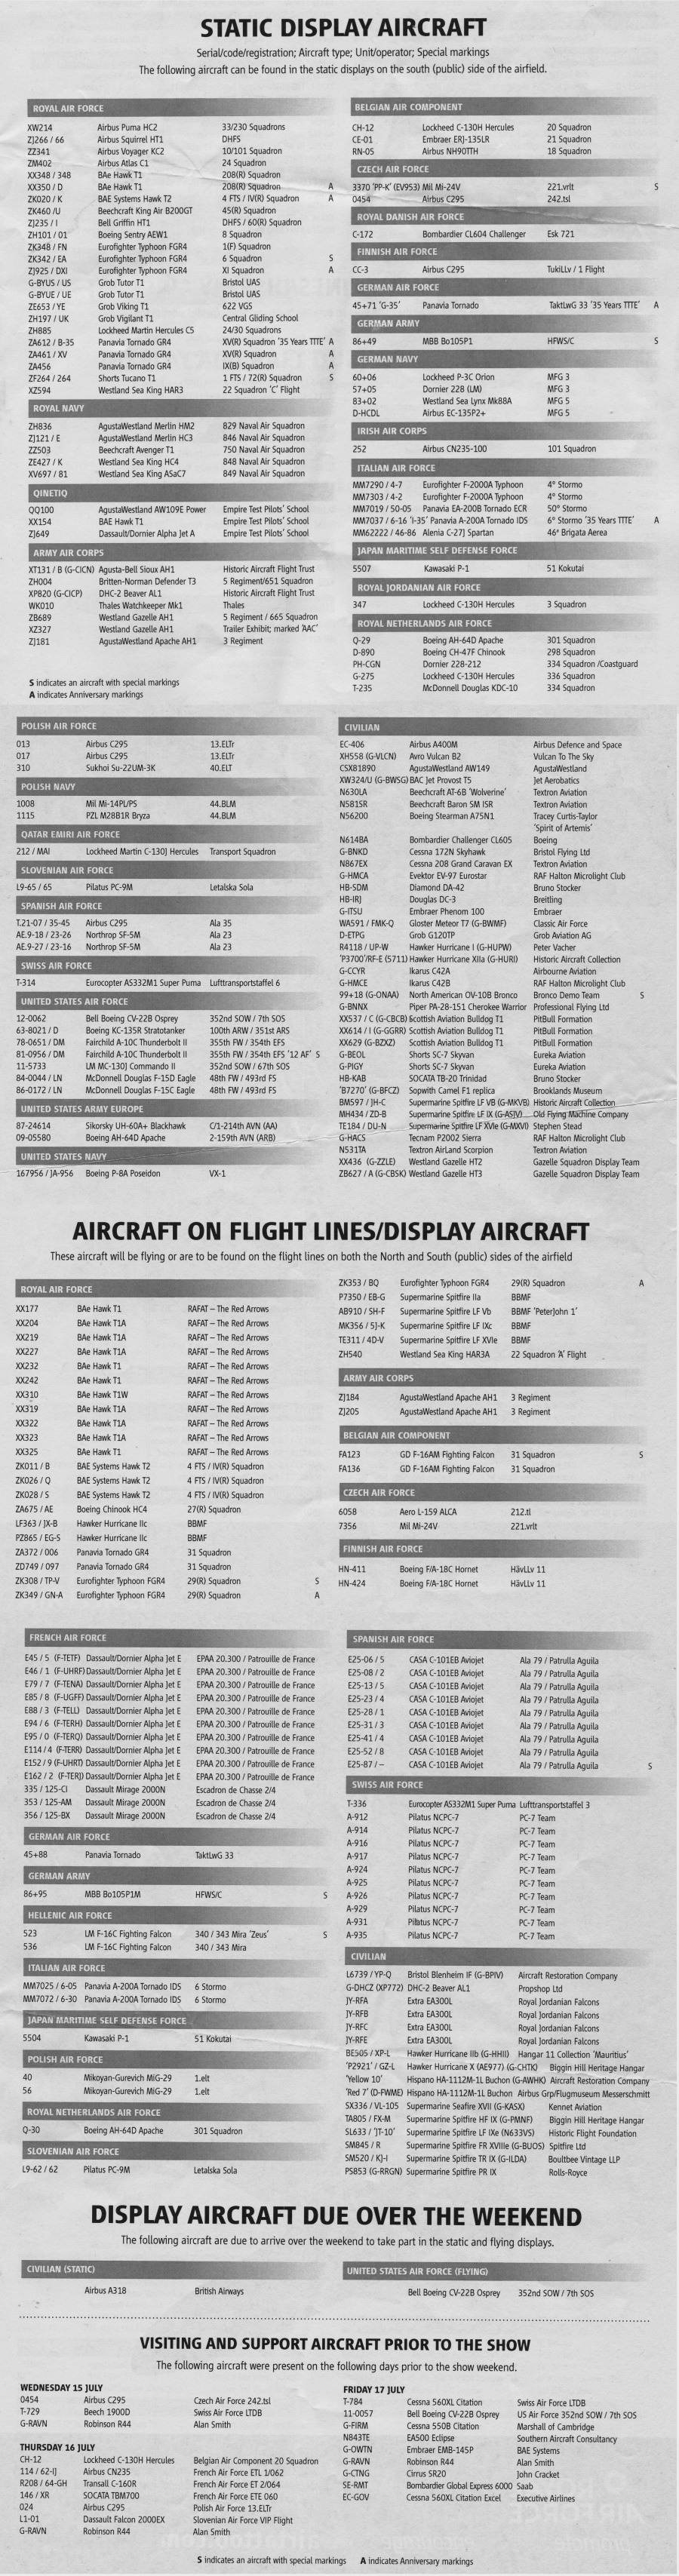 Where can you find a schedule of air shows in 2010?